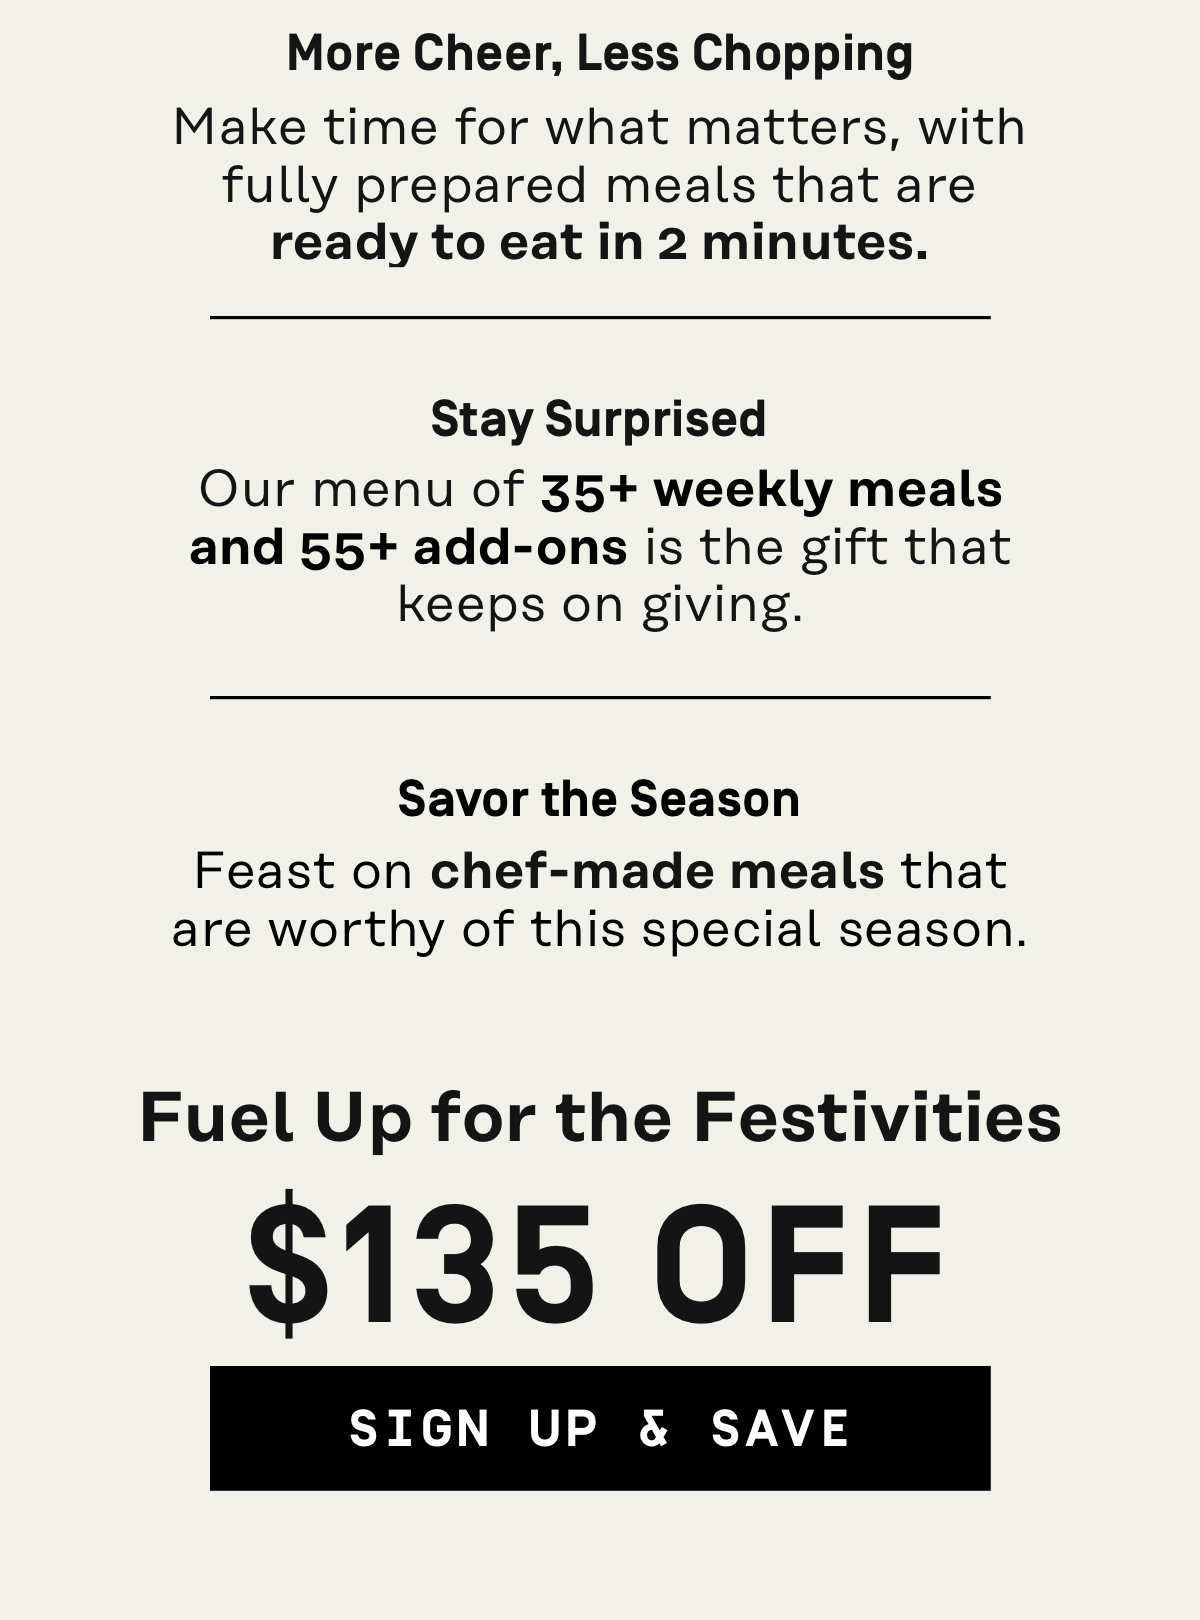 Fuel up for the festivites $135 OFF | Sign up & Save